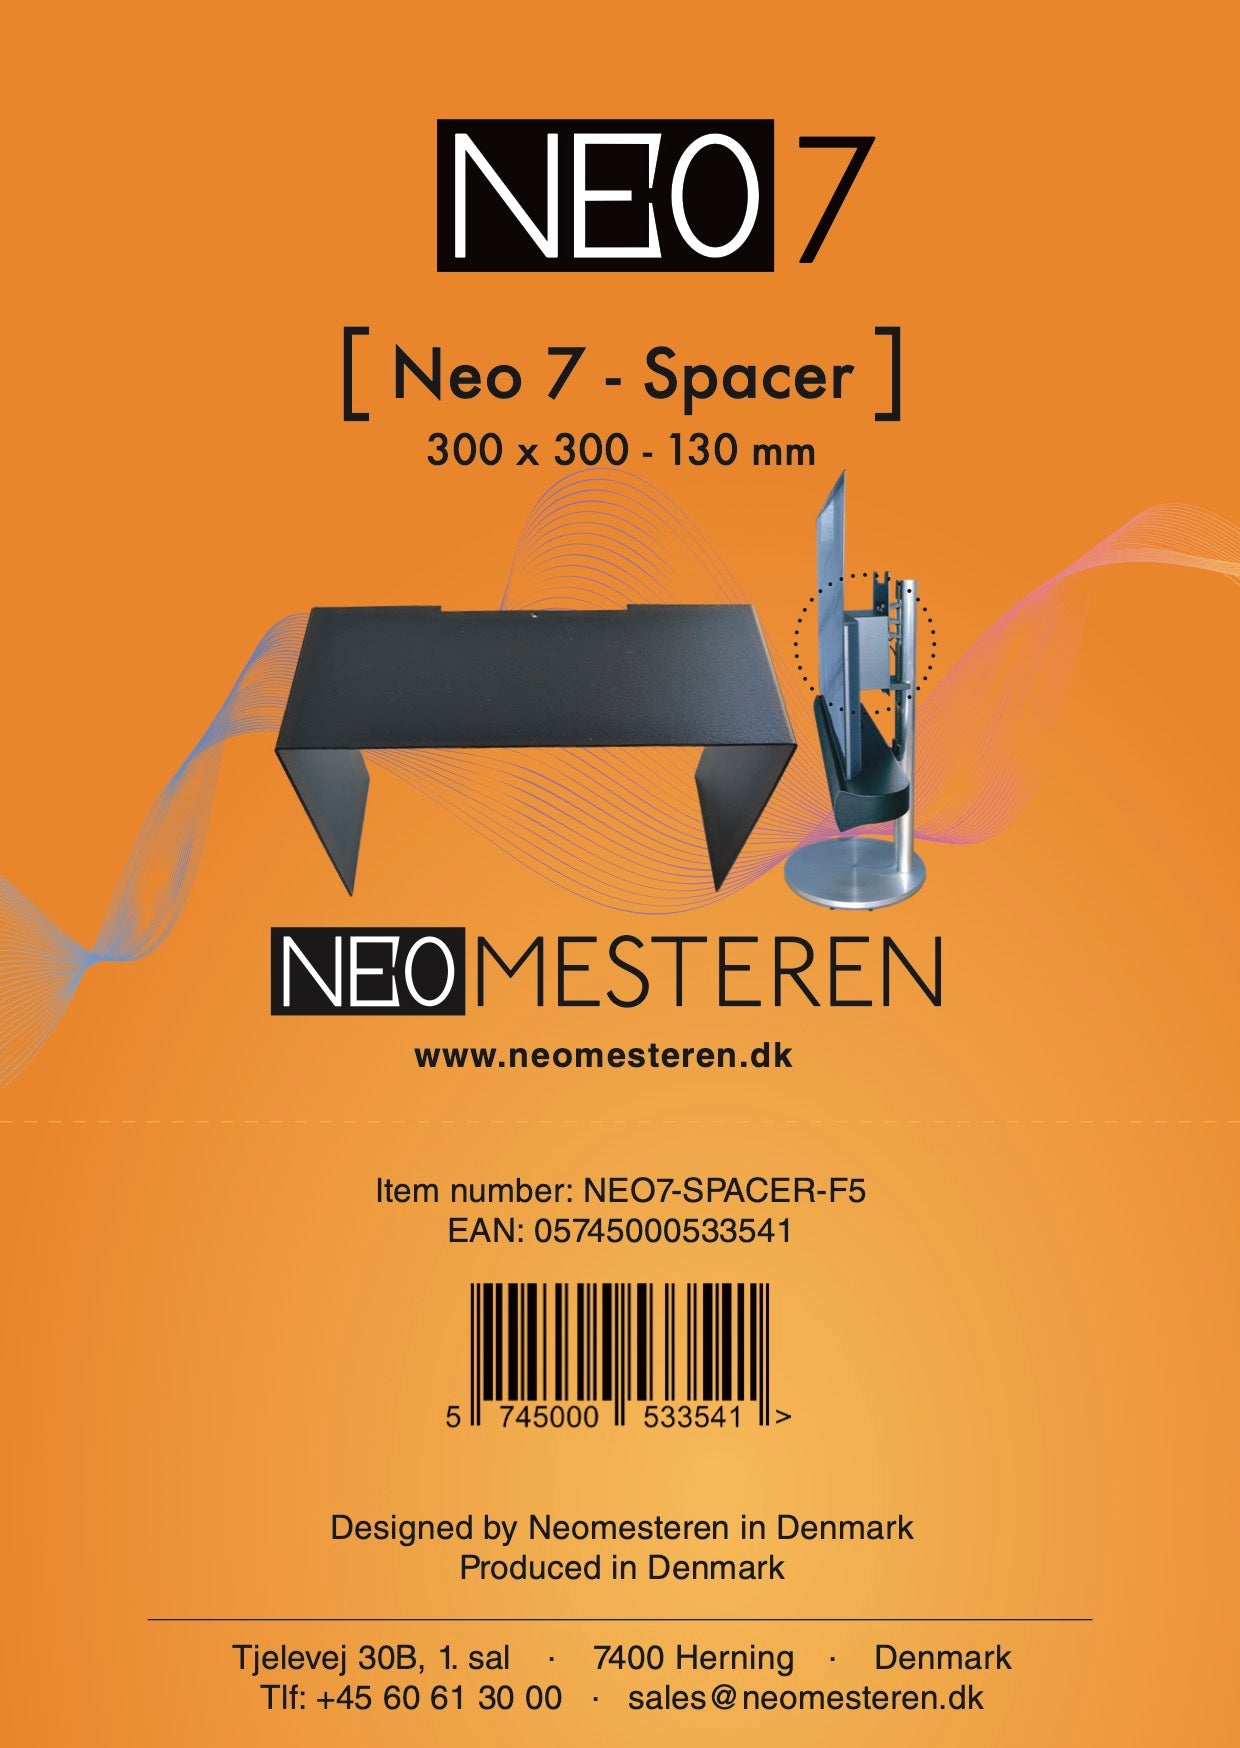 Neo 7 - Spacer - for a Beovision stand with Neo 7 and a new TV